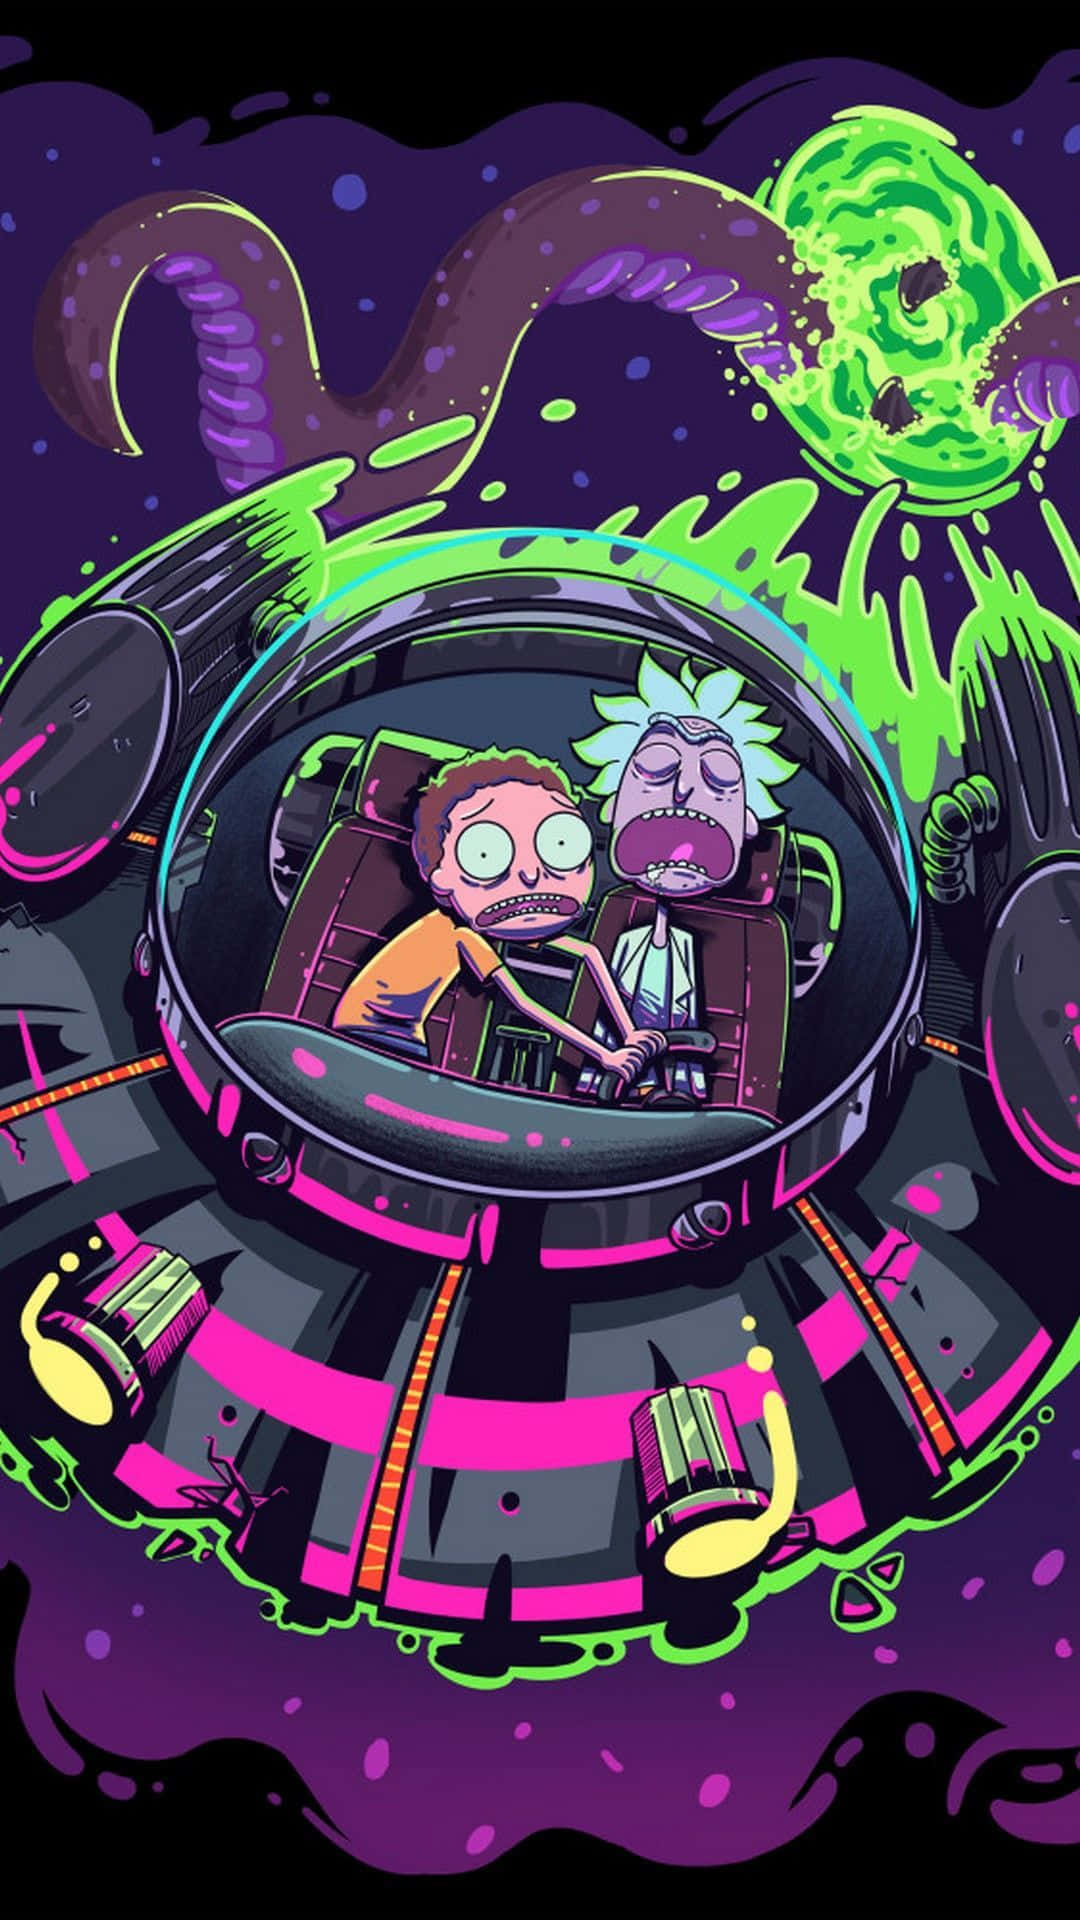 Rick And Morty Fan Art On Spaceship Wallpaper